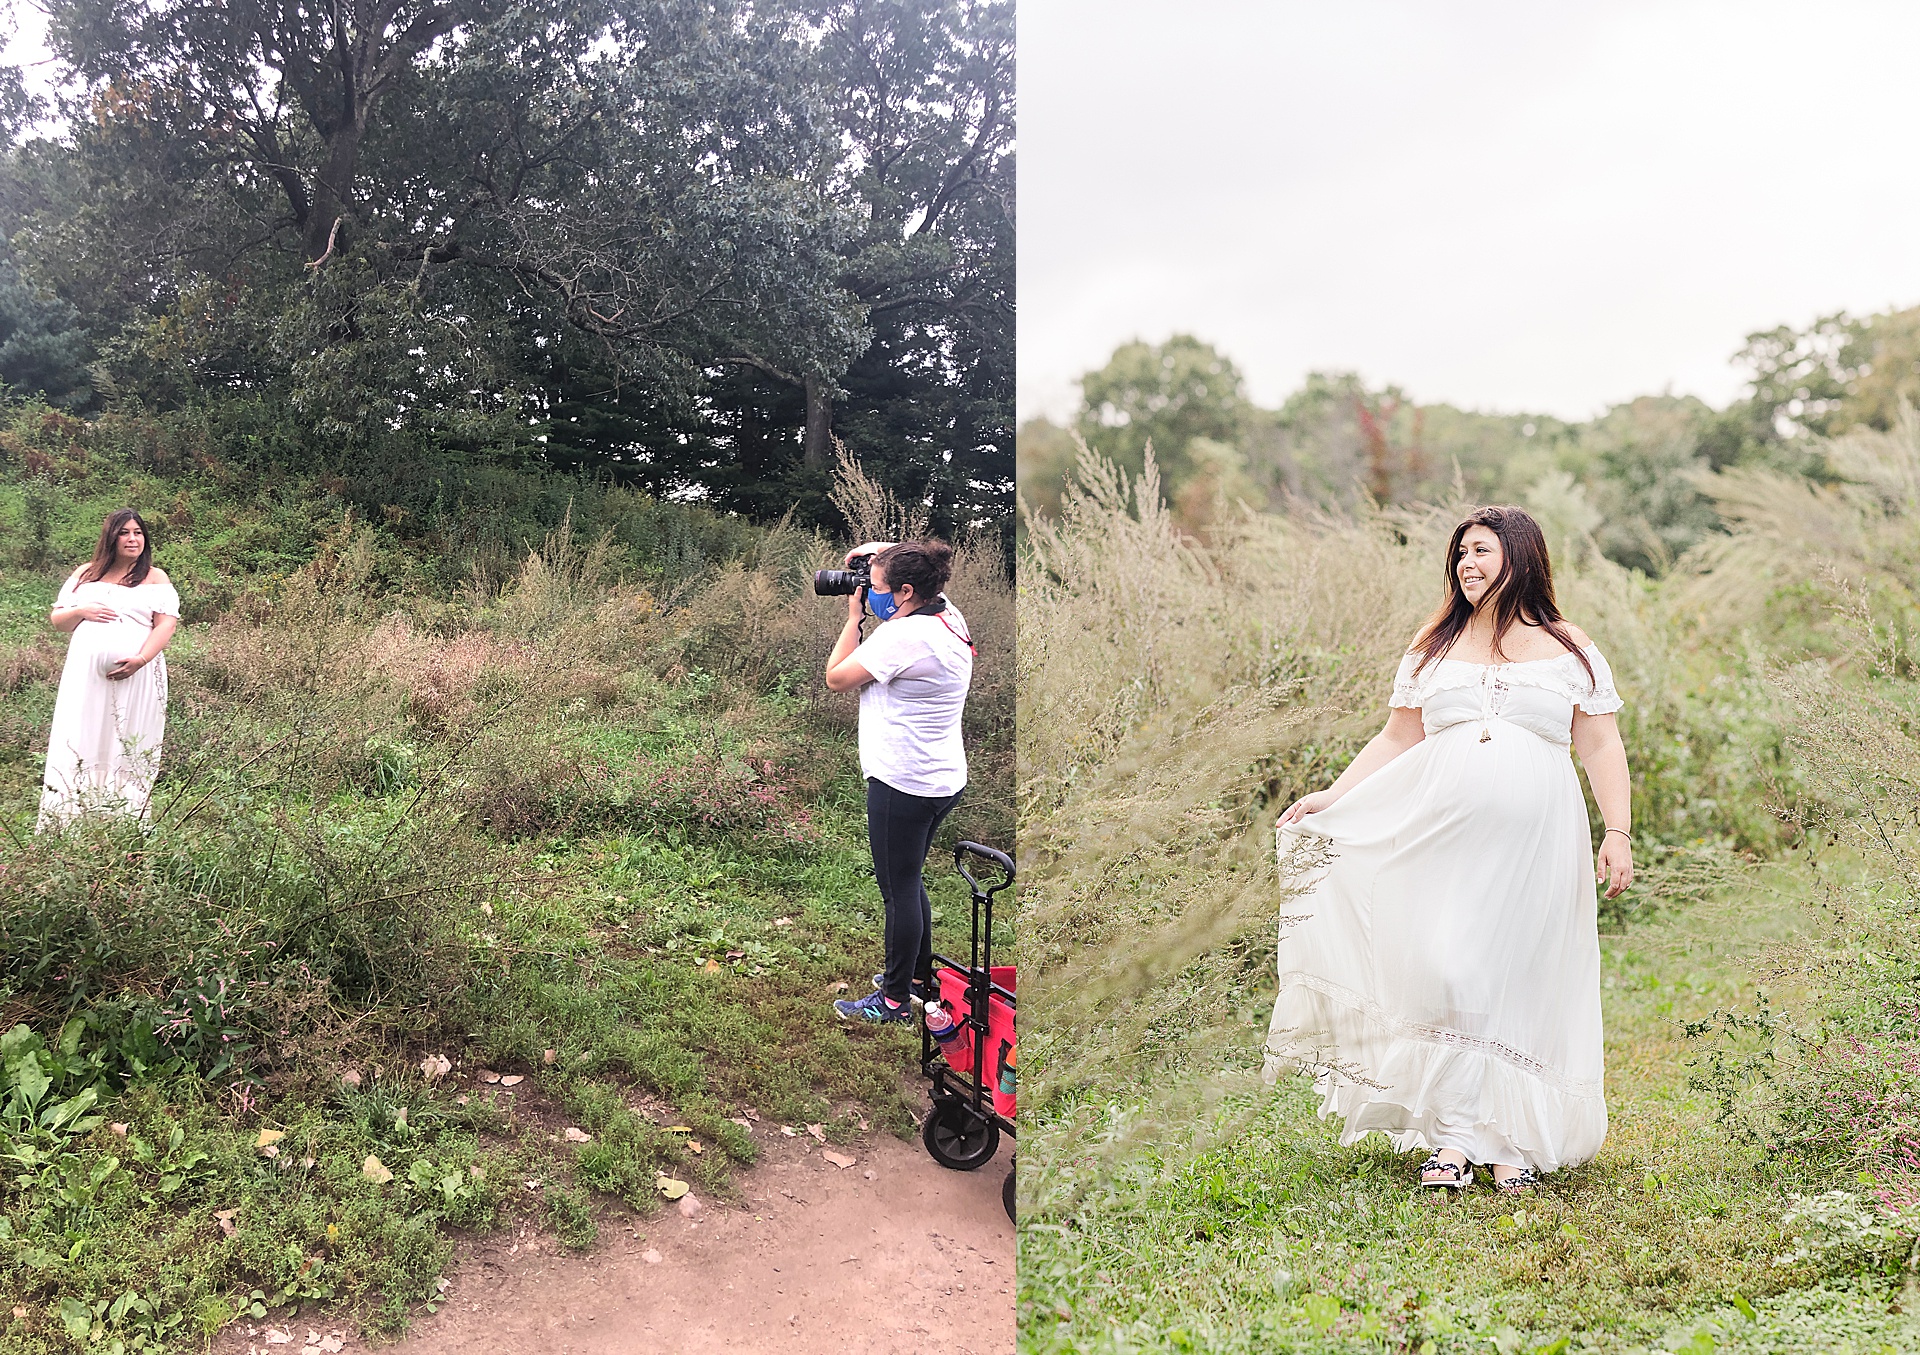 behind the scenes photo of maternity photo session with Sara Sniderman Photography in Natick Massachusetts